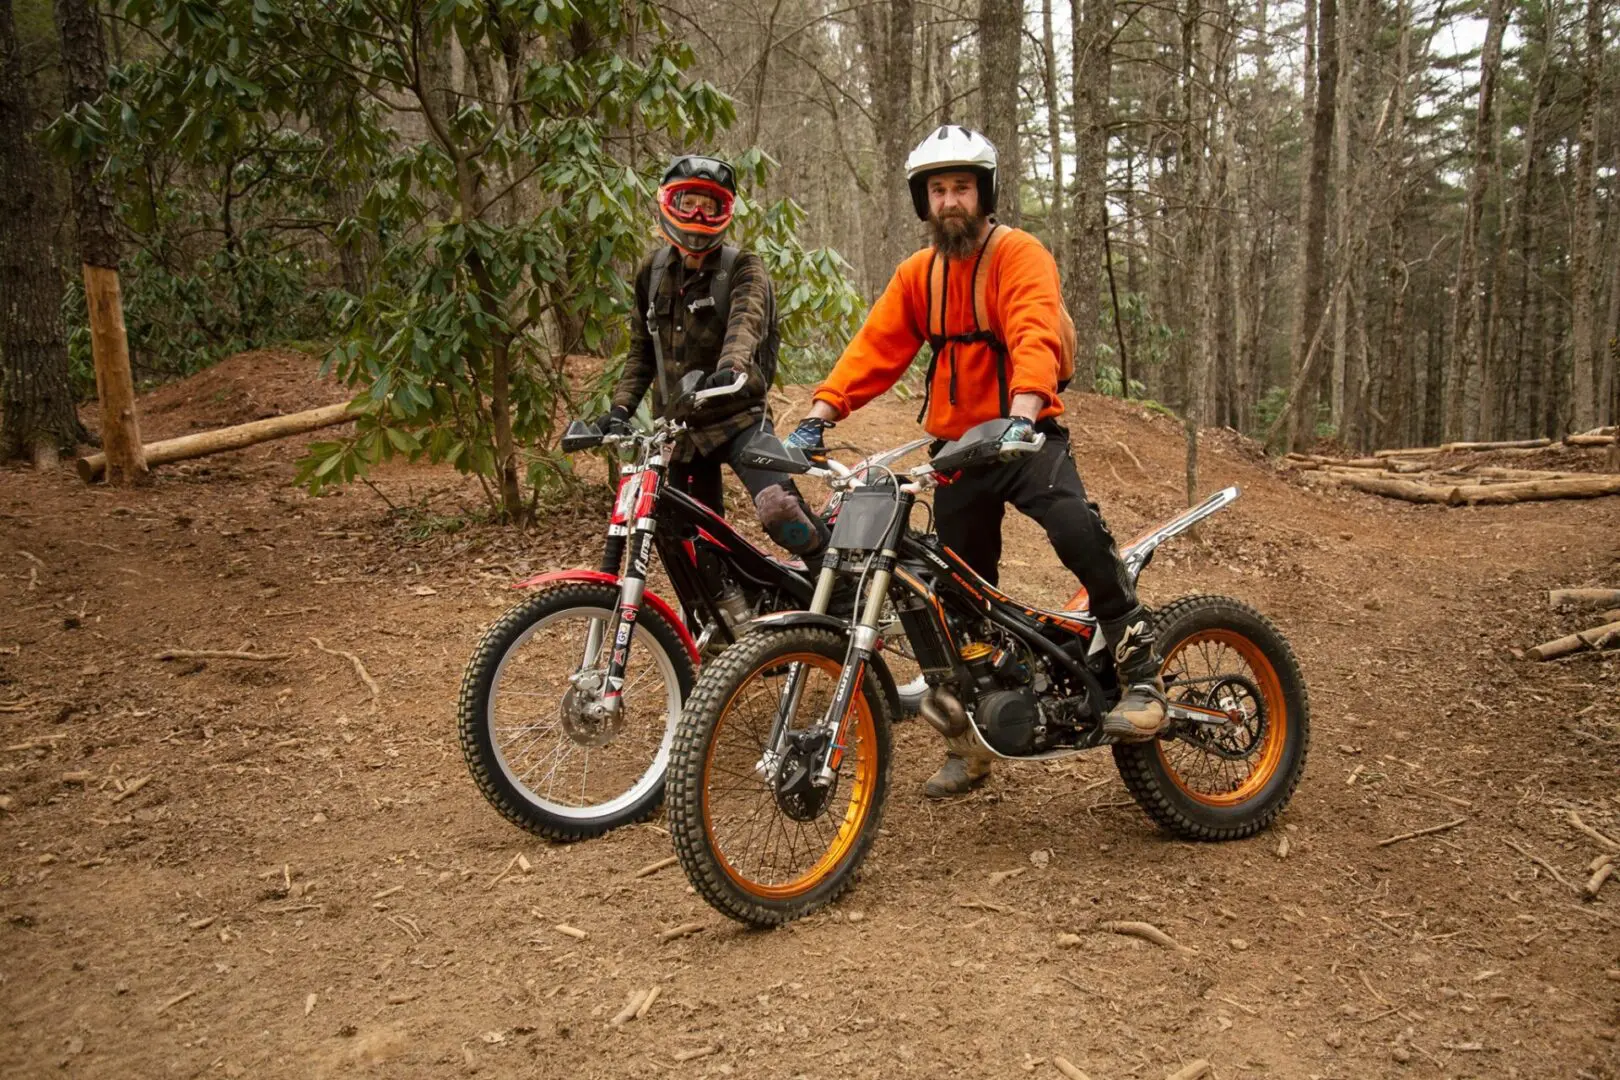 Two people on bikes in the woods near trees.